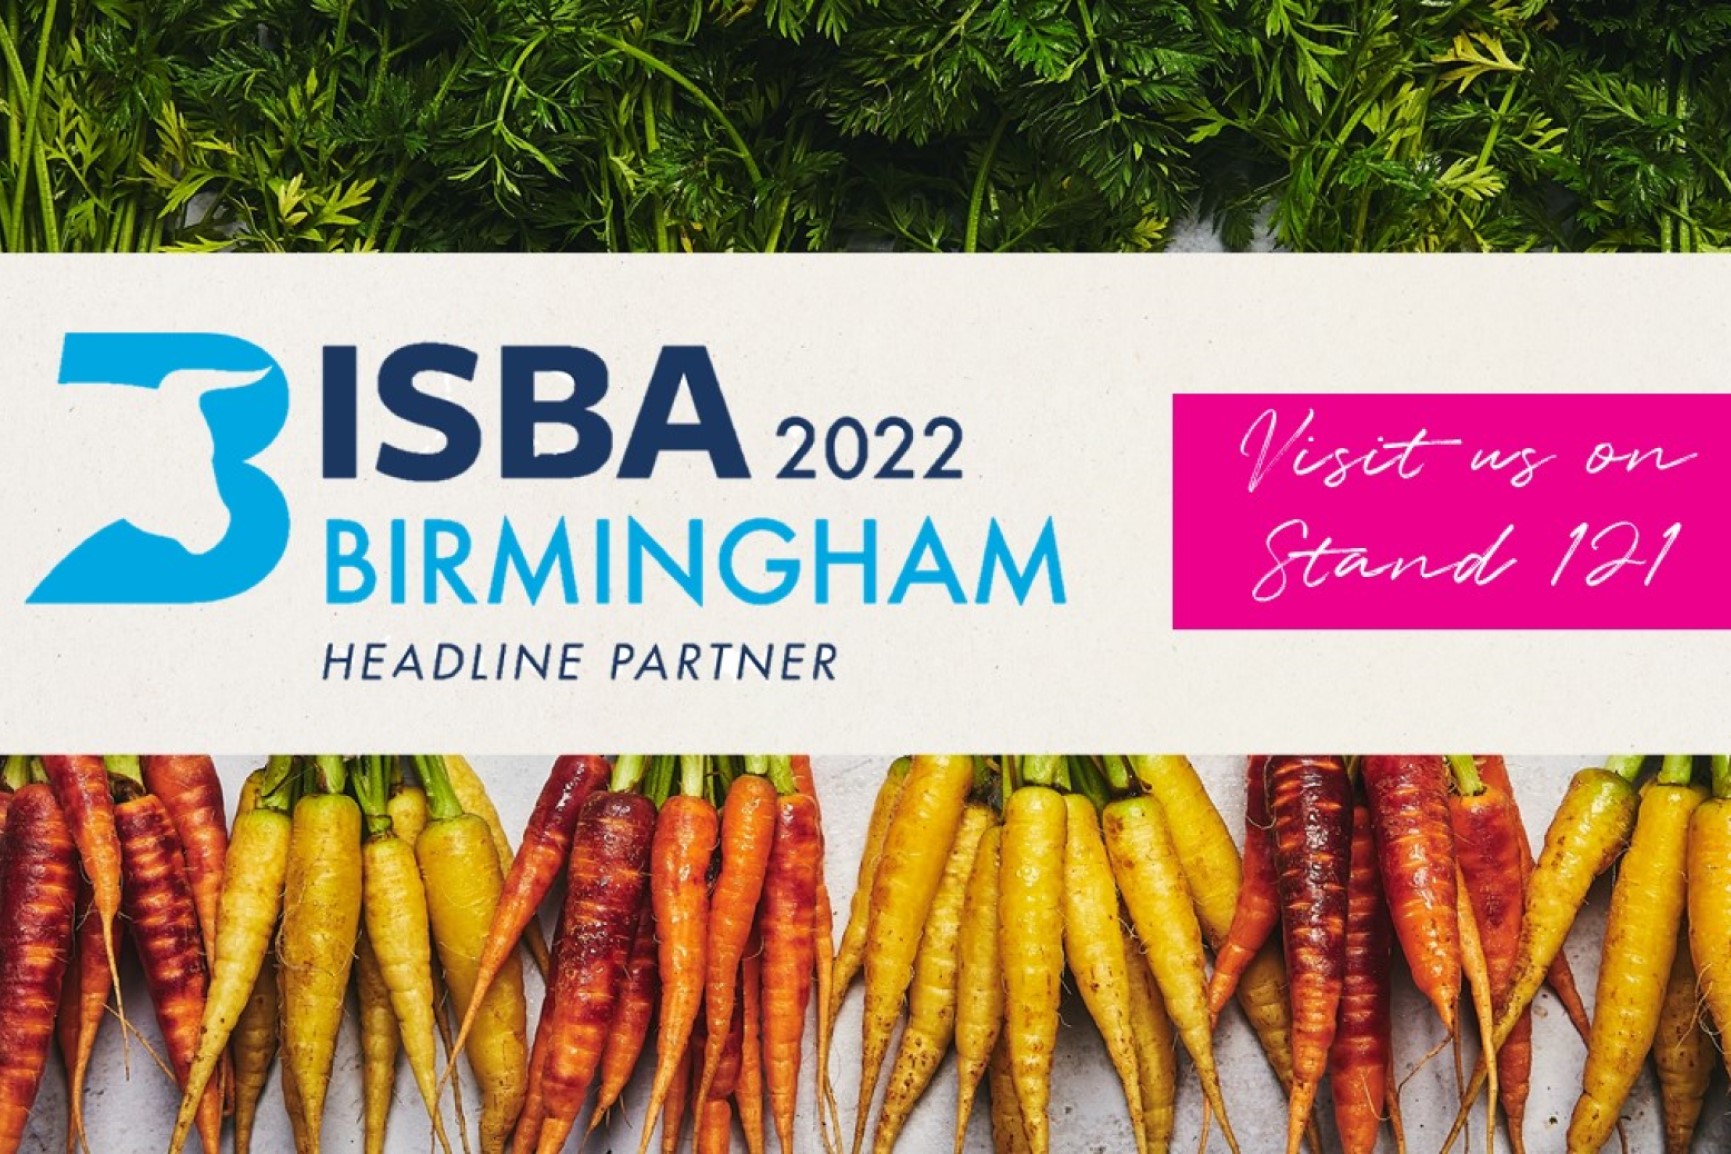 Headline Partner at the ISBA Conference 2022